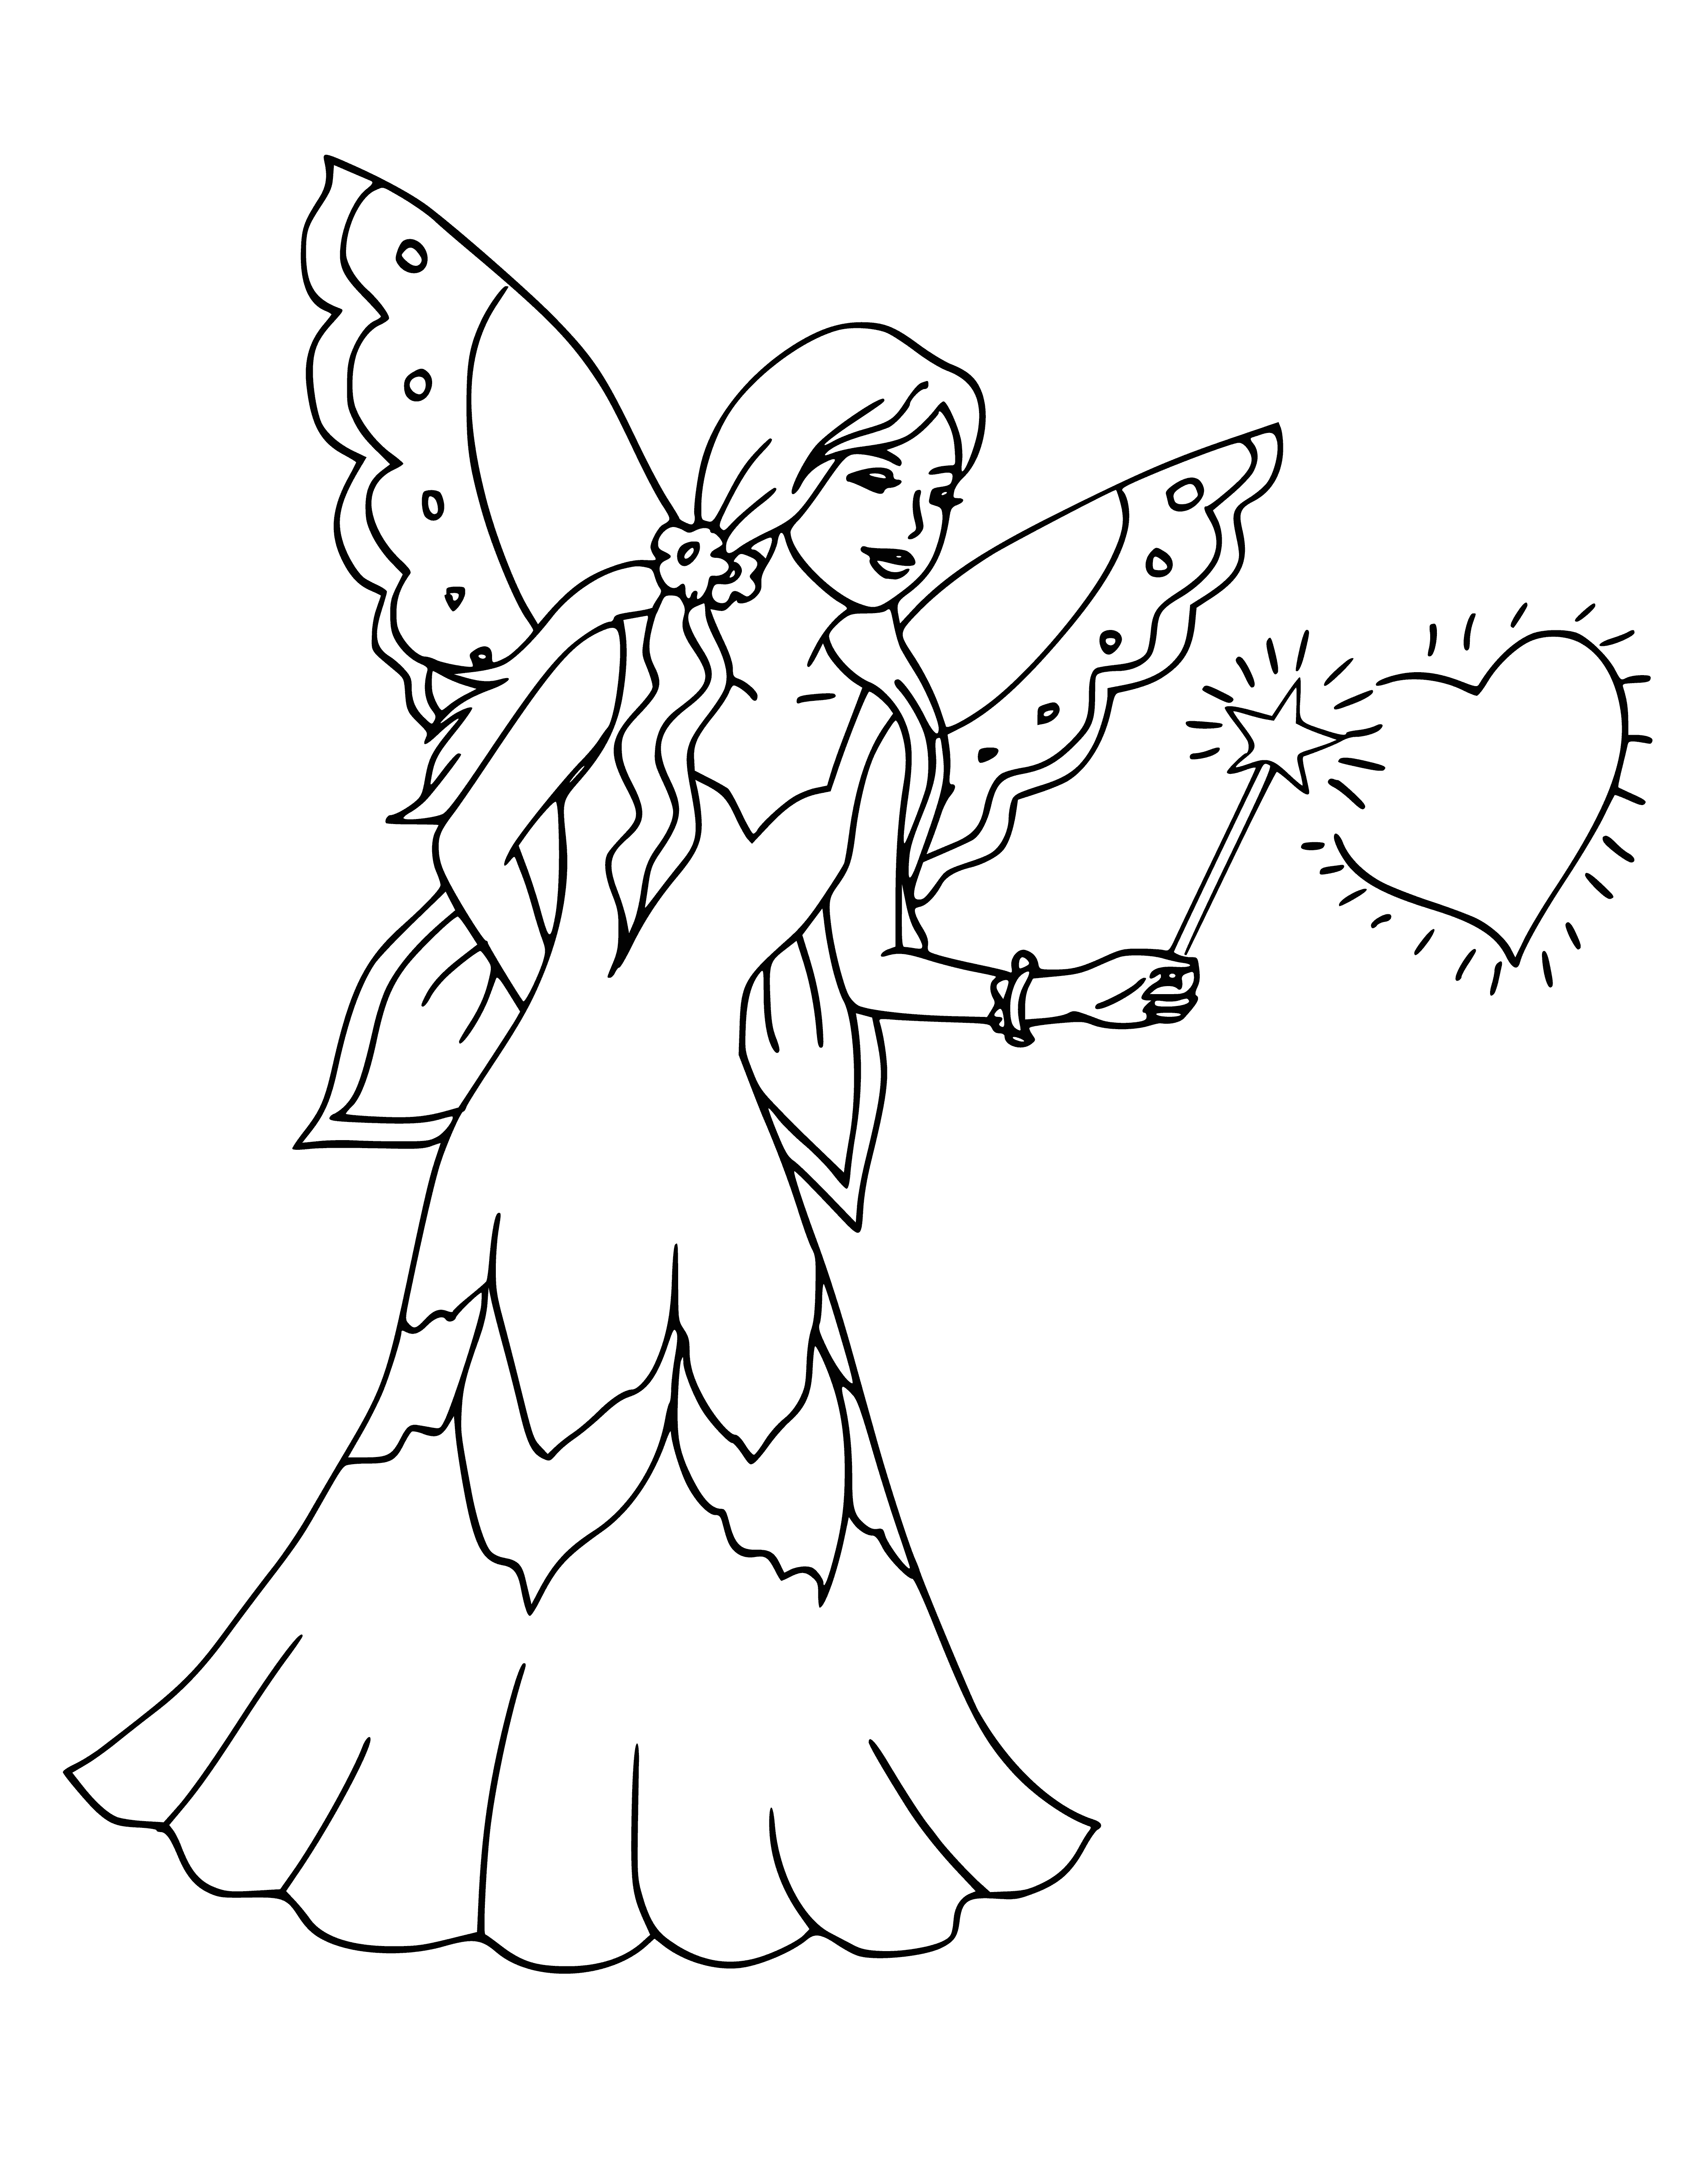 coloring page: Elves and fairies, wearing green and colorful clothes, flying and looking happy, fill the coloring page.